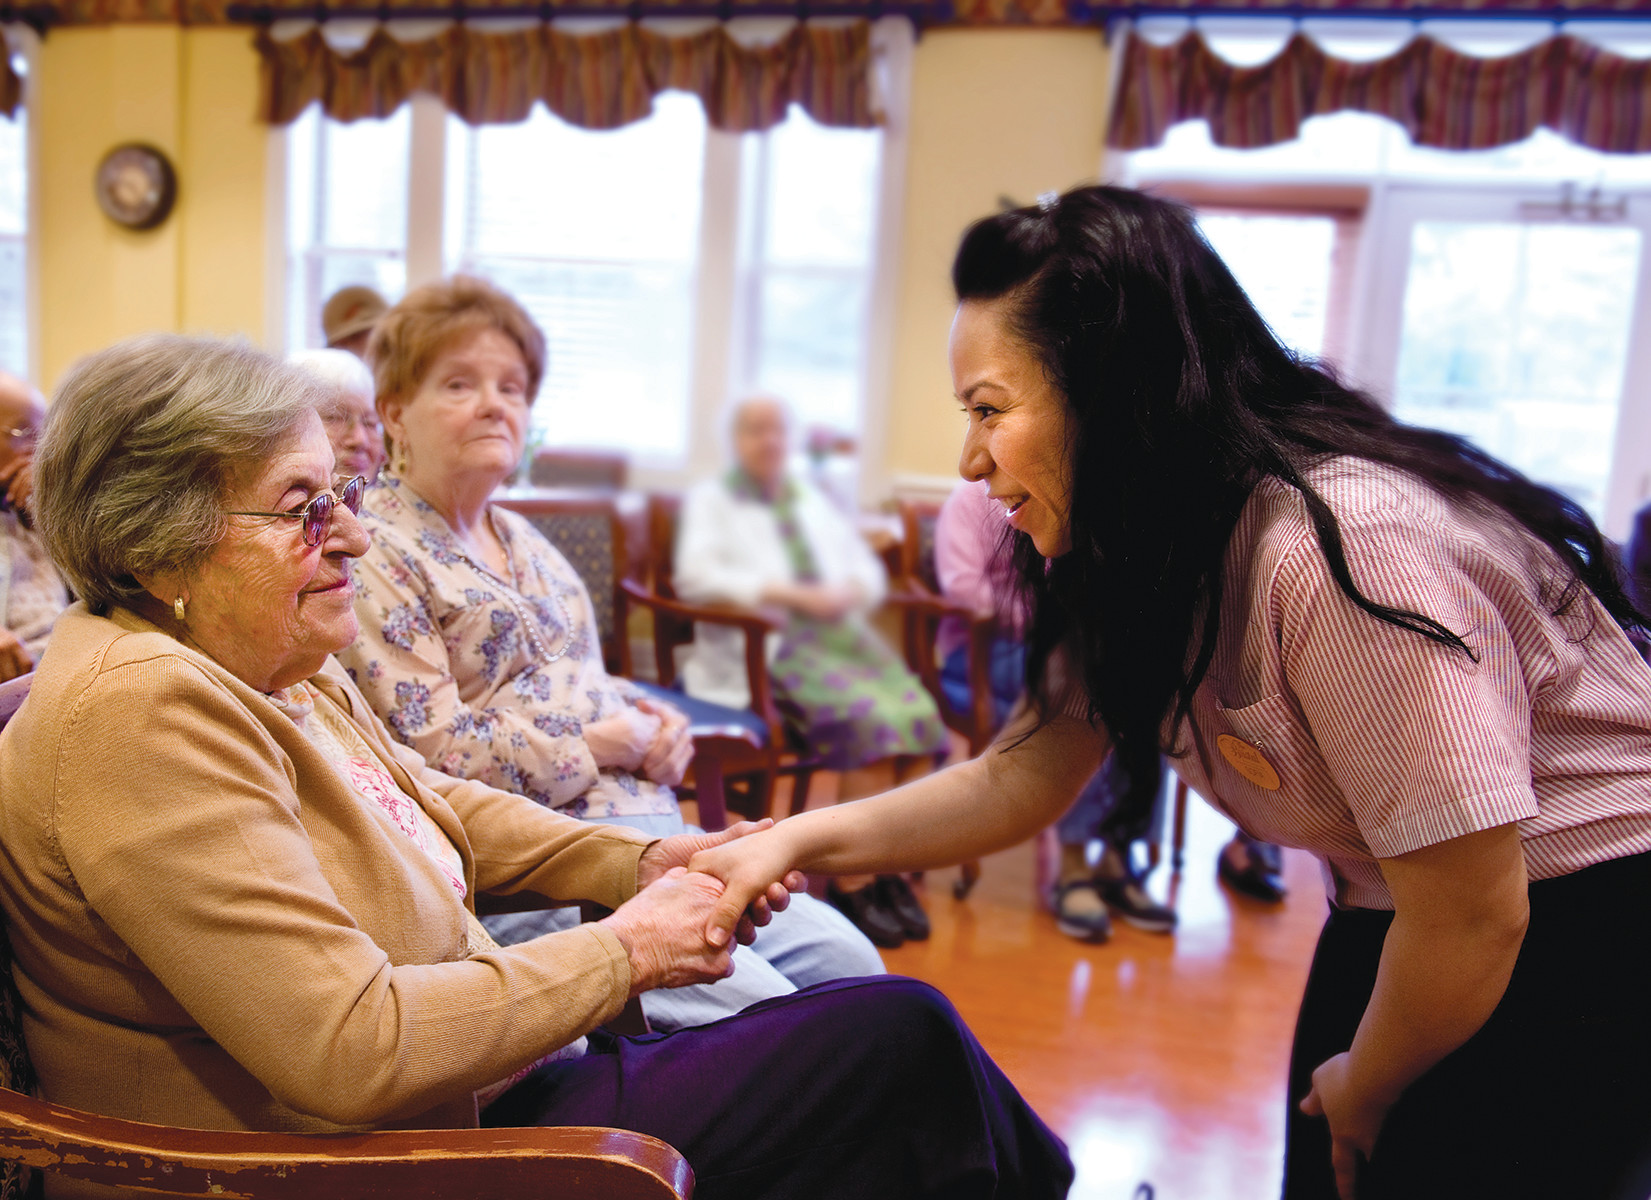 The Bristal houses a special neighborhood called Reflections, a comprehensive memory-care program that focuses on older adults who are facing early to mid-stage Alzheimer’s disease and related cognitive disorders.